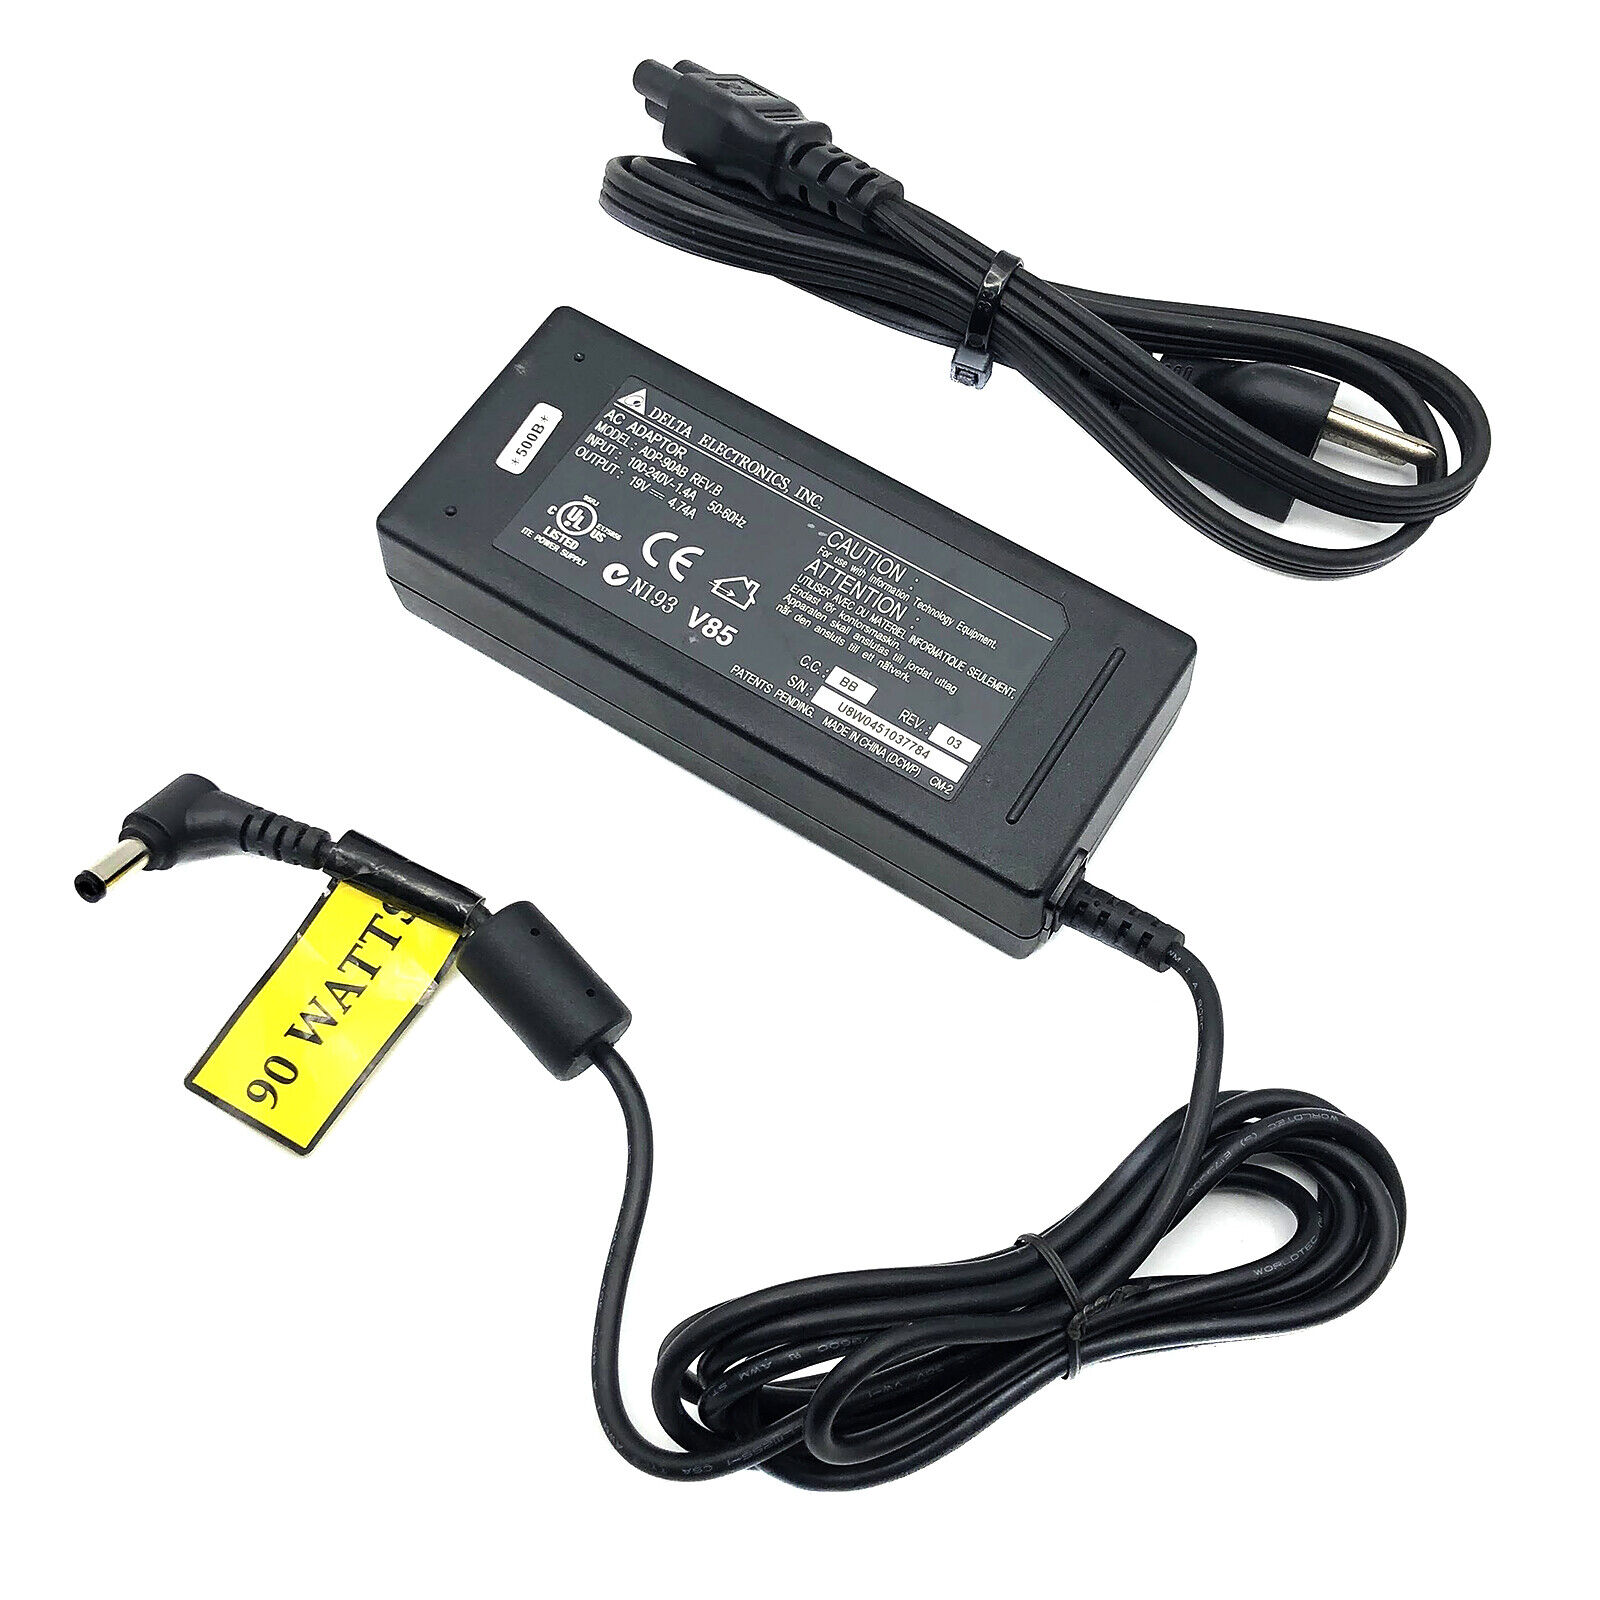 Original Delta 90W AC Adapter For Getac B300 B300X S400 Rugged Laptop Charger